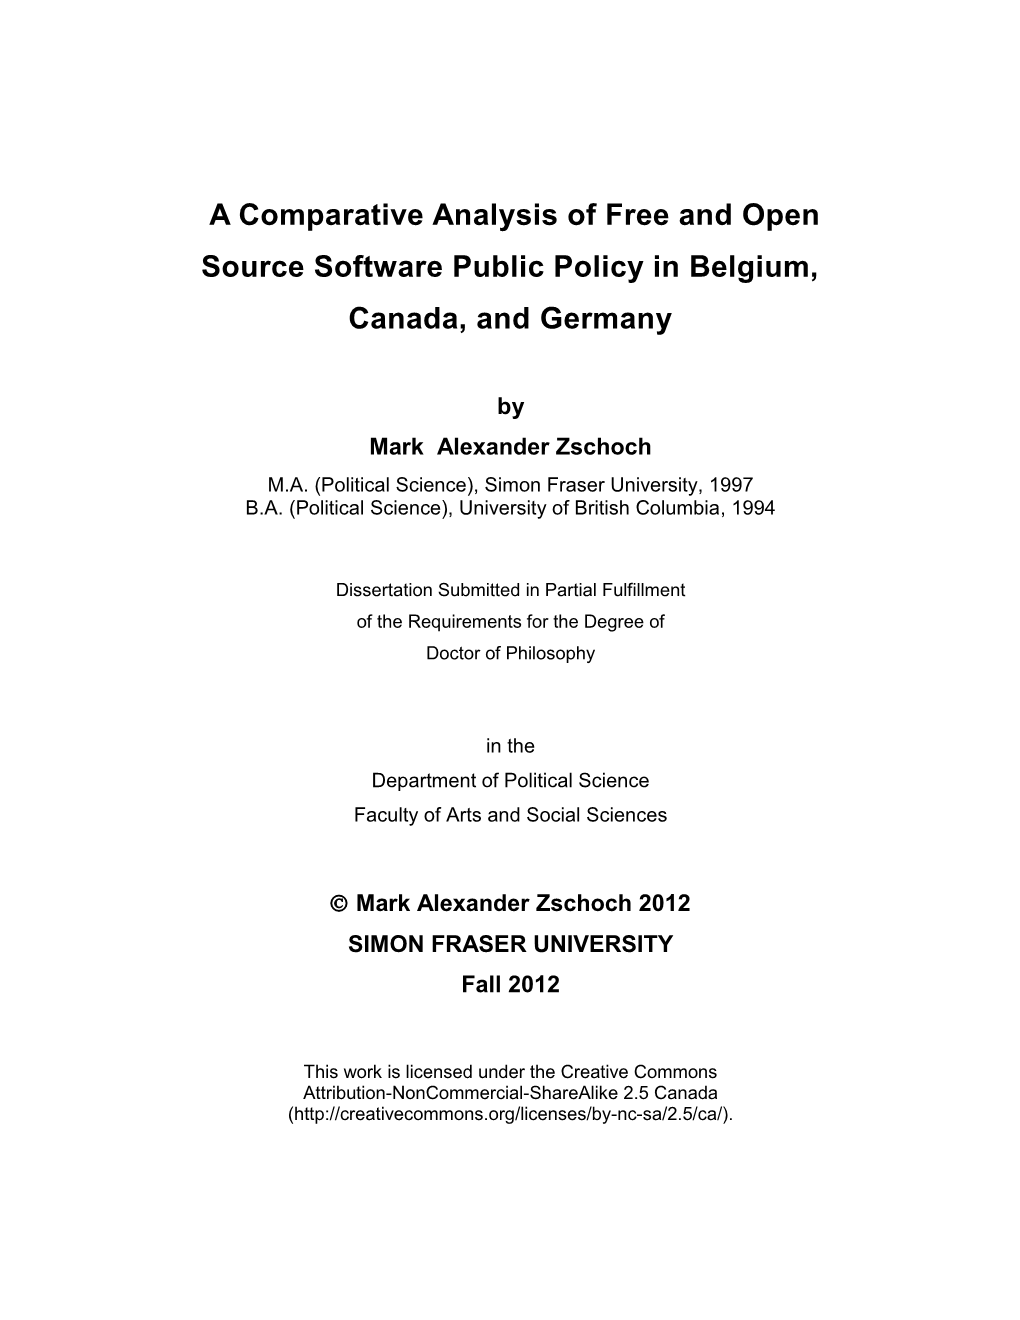 A Comparative Analysis of Free and Open Source Software Public Policy in Belgium, Canada, and Germany